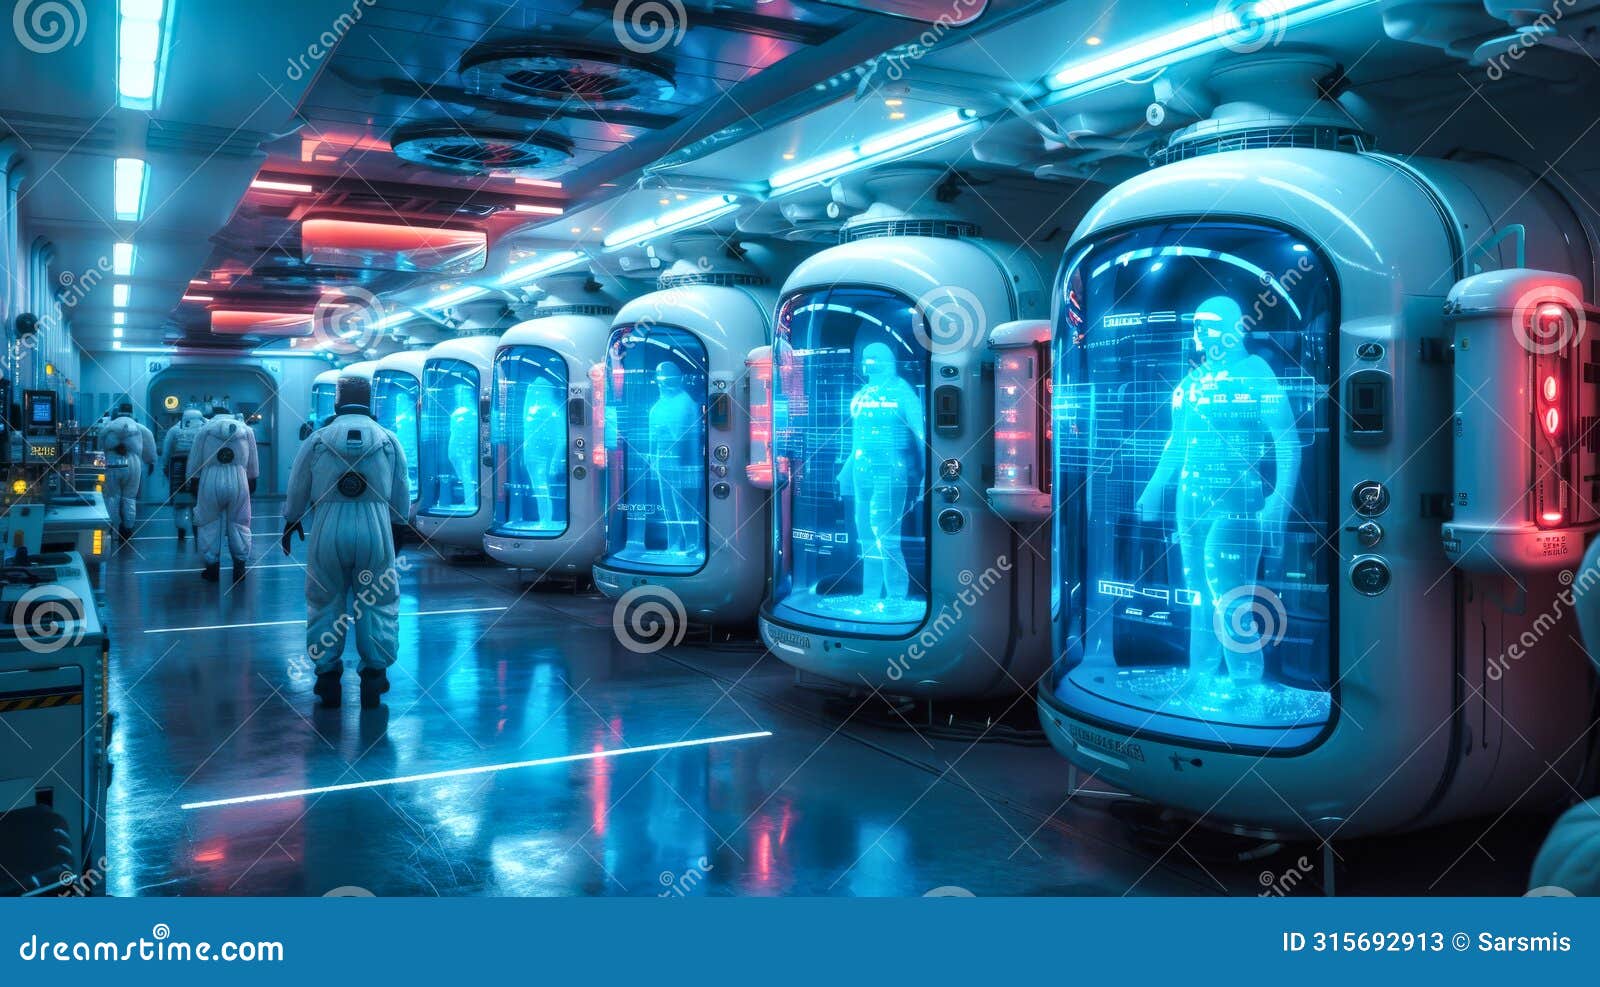 cryogenic chambers for freezing bodies. scientists in protective suits walking through a cryo chamber facility